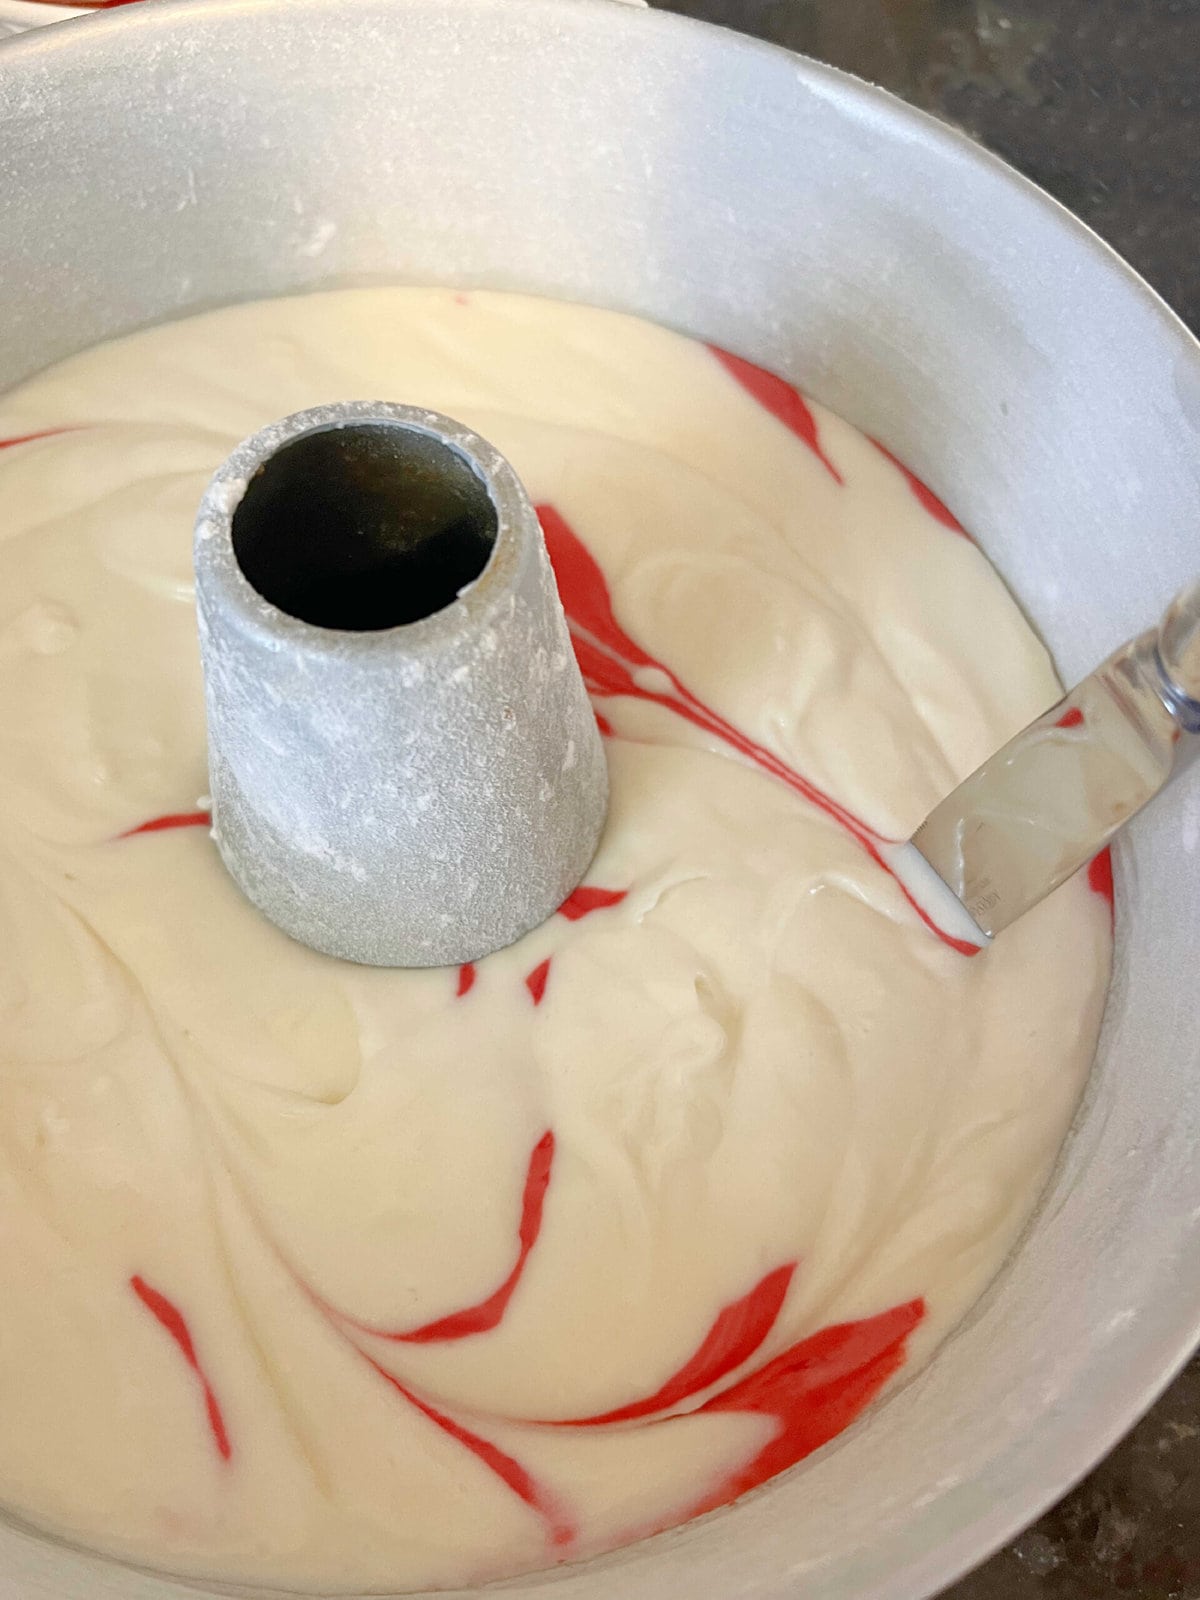 Marbling the cake batter in the pan with a knife.